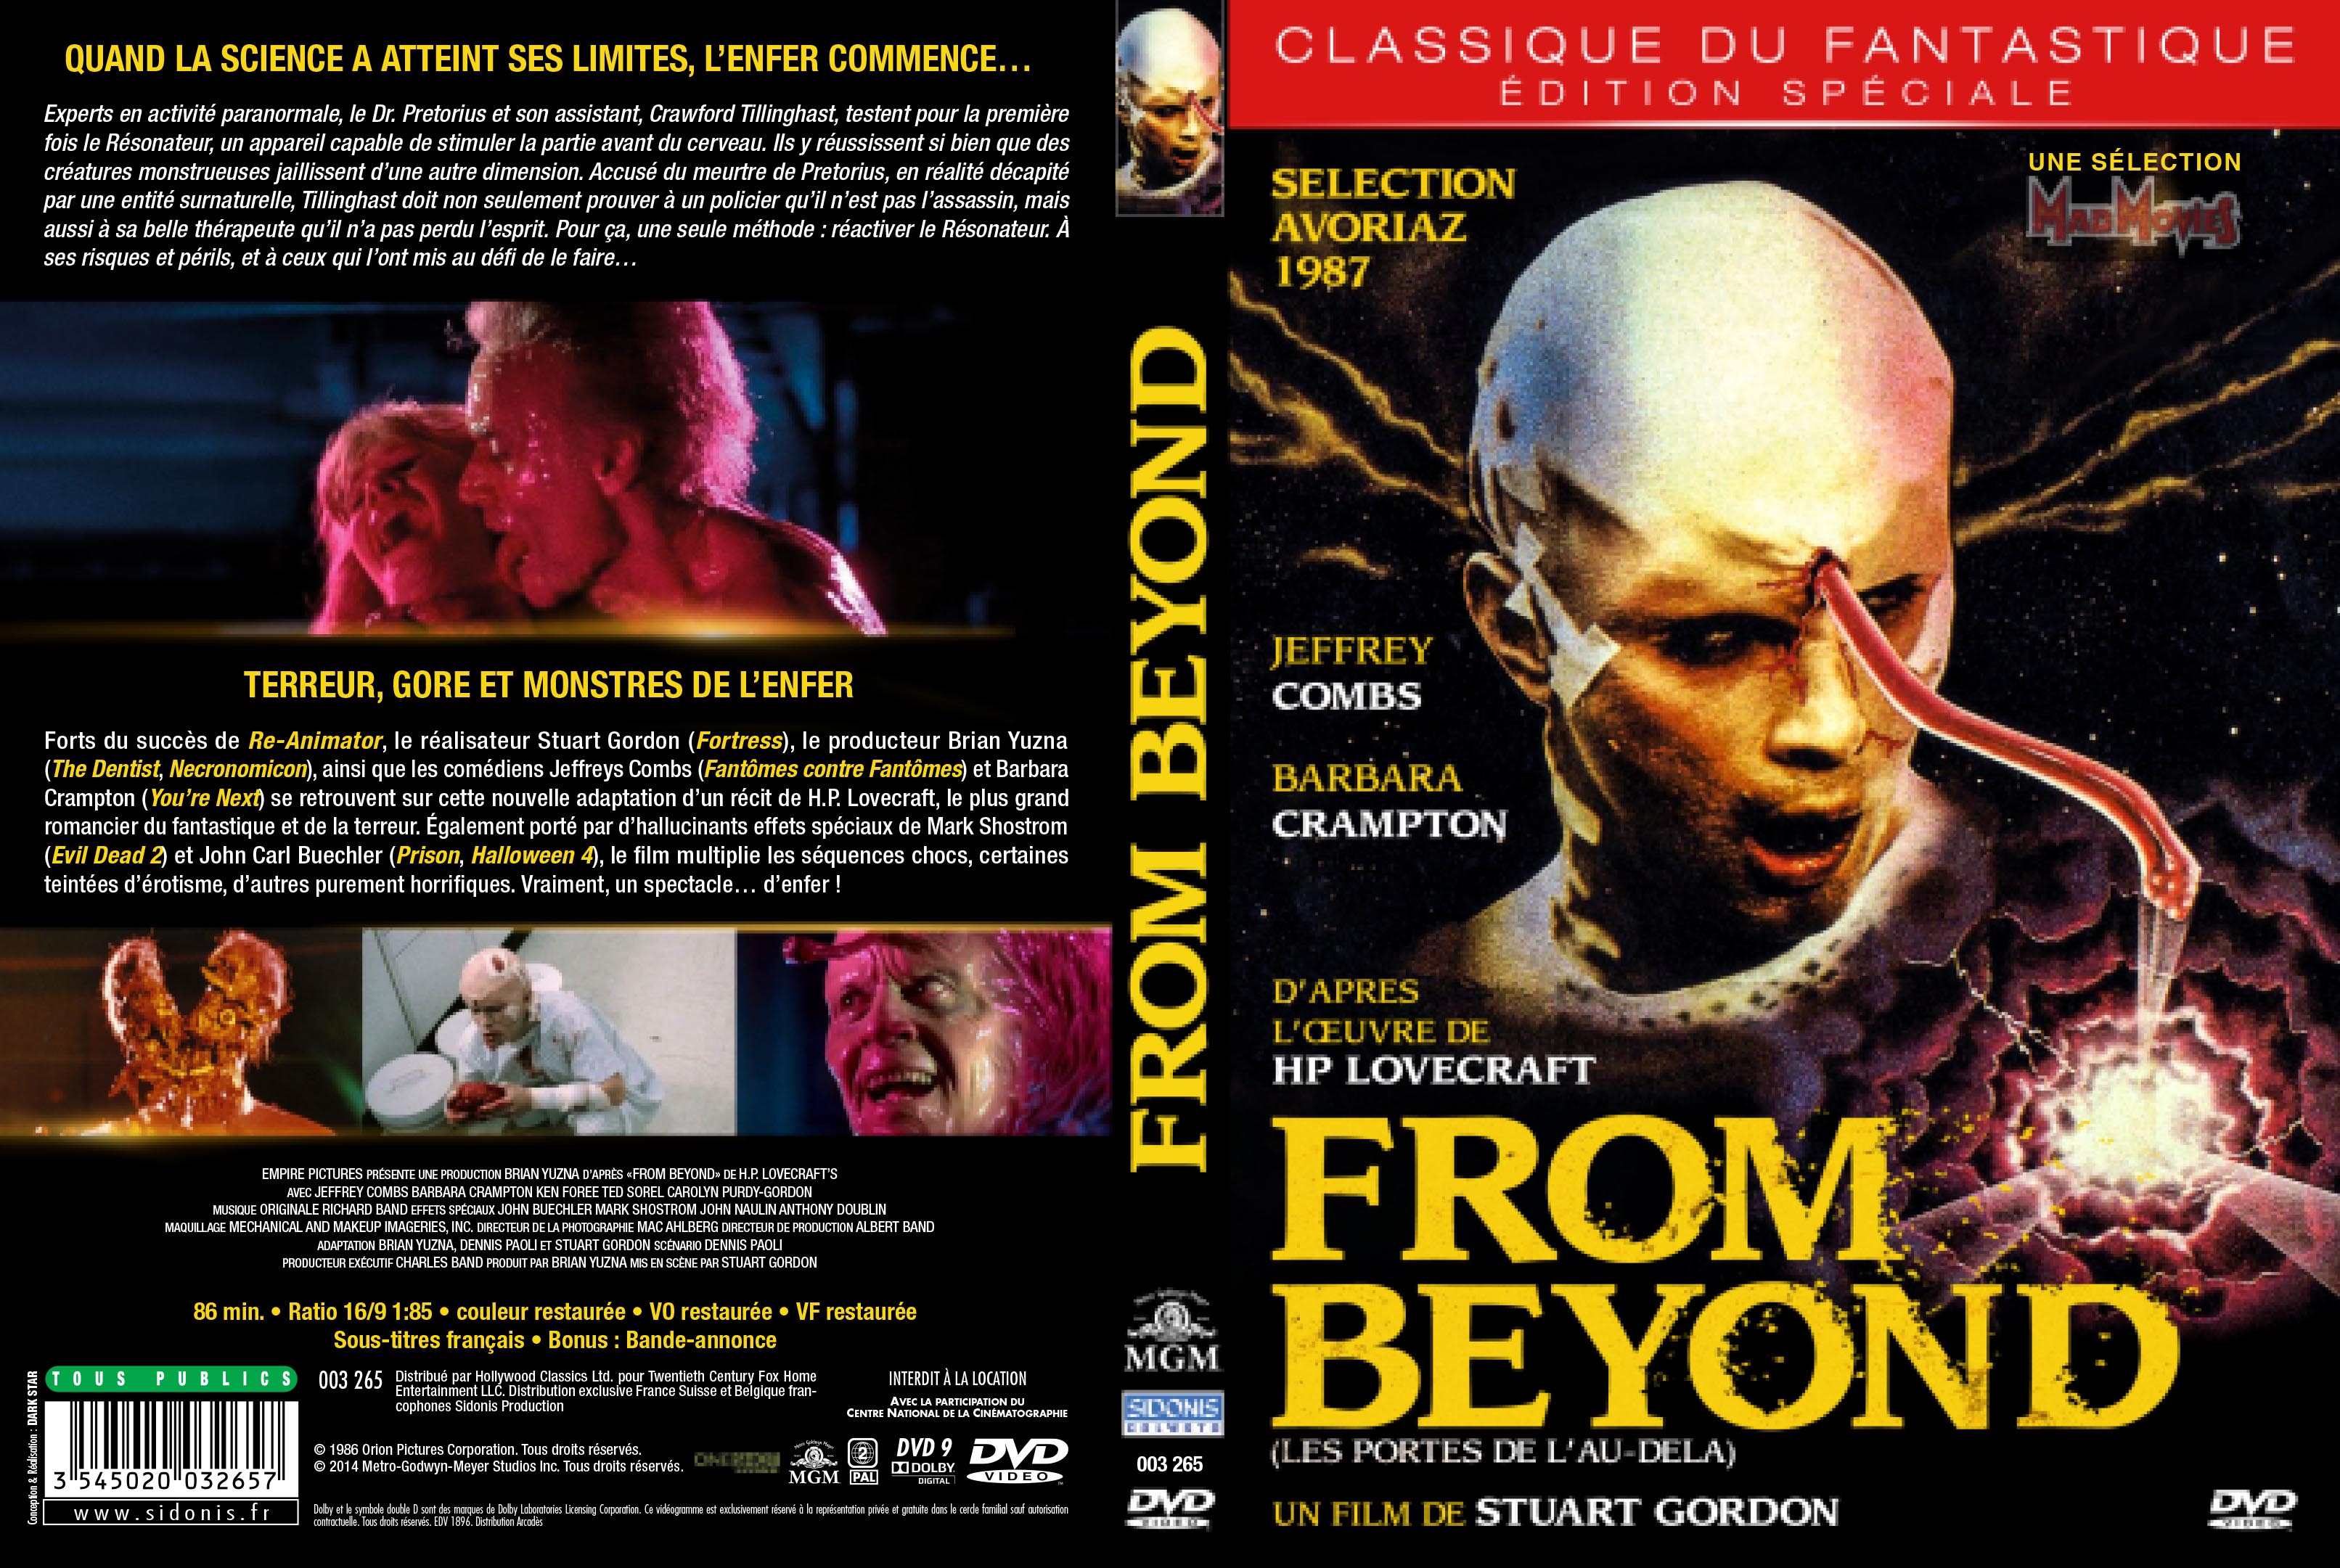 Jaquette DVD From beyond v2